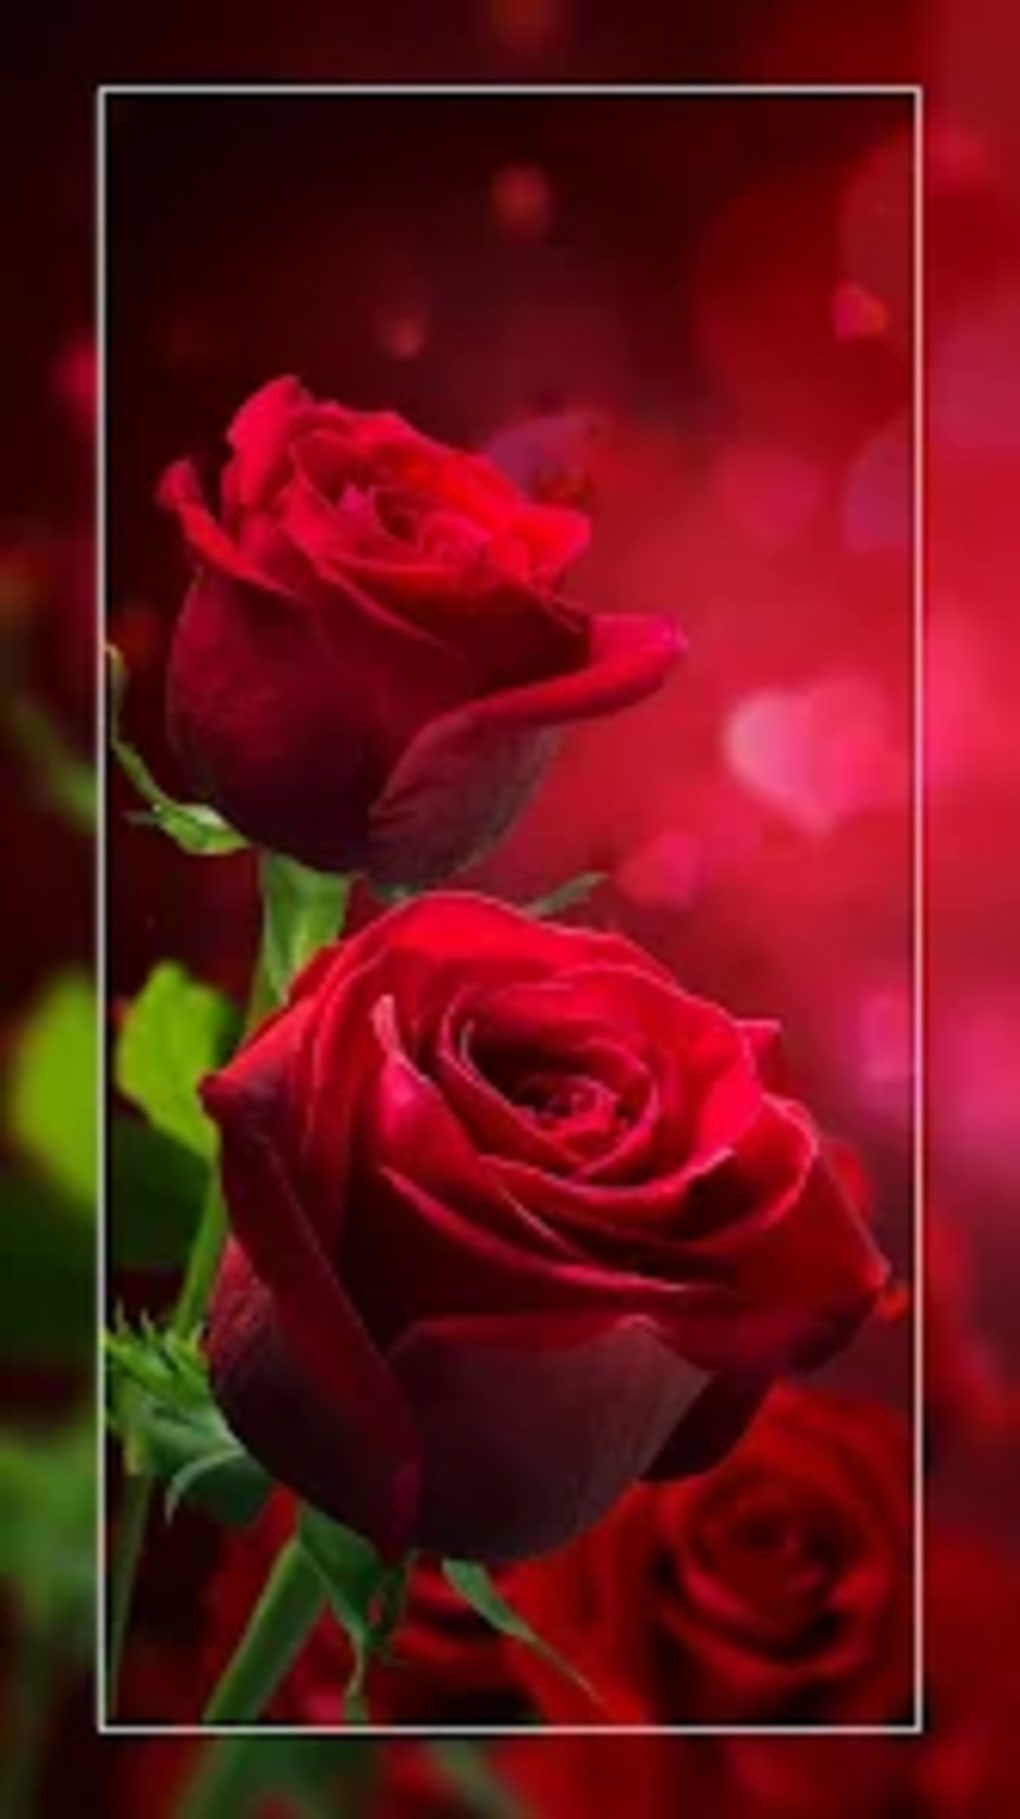 Roses Live Wallpaper Free Android Live Wallpaper download  Download the  Free Roses Live Wallpaper Live Wallpaper to your Android phone or tablet